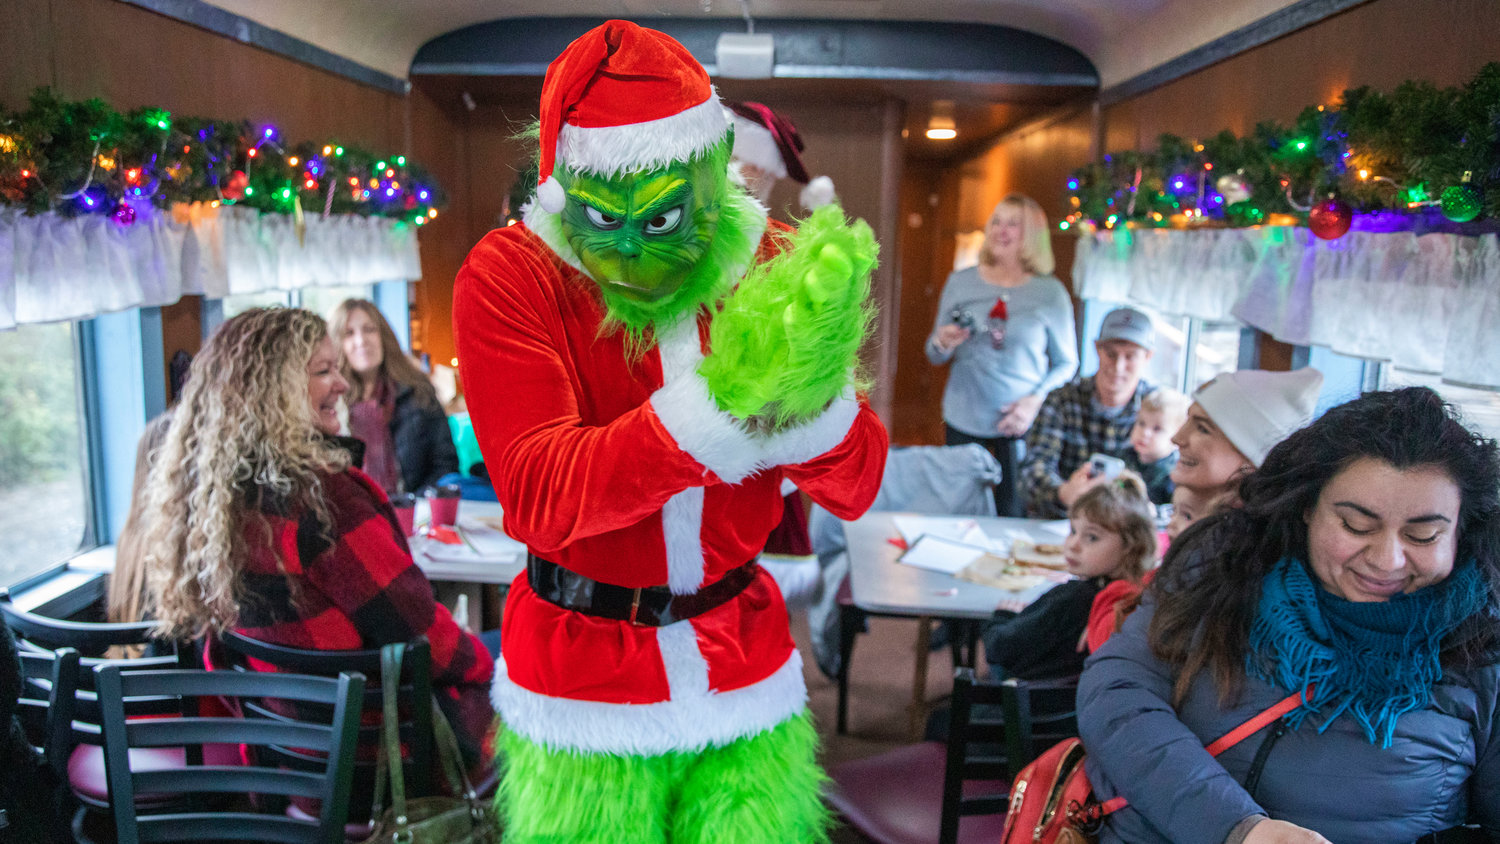 The Grinch makes an appearance at the Steam Train Depot in Chehalis on Saturday as a lack of insurance continues to halt transportation services.